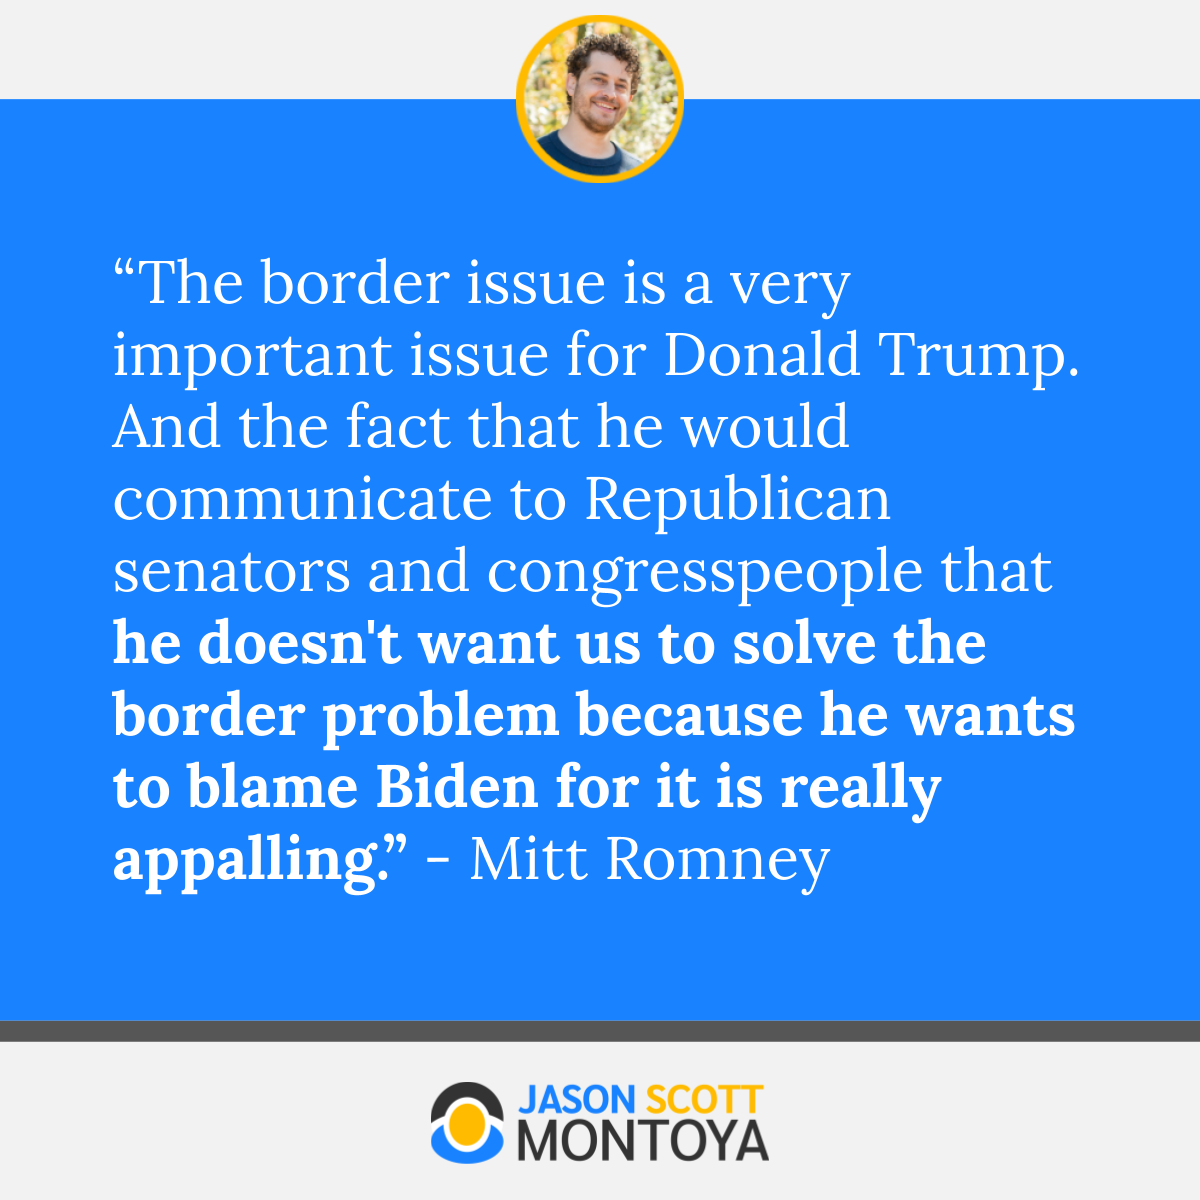 “The border issue is a very important issue for Donald Trump. And the fact that he would communicate to Republican senators and congresspeople that he doesn't want us to solve the border problem because he wants to blame Biden for it is really appalling.” - Mitt Romney